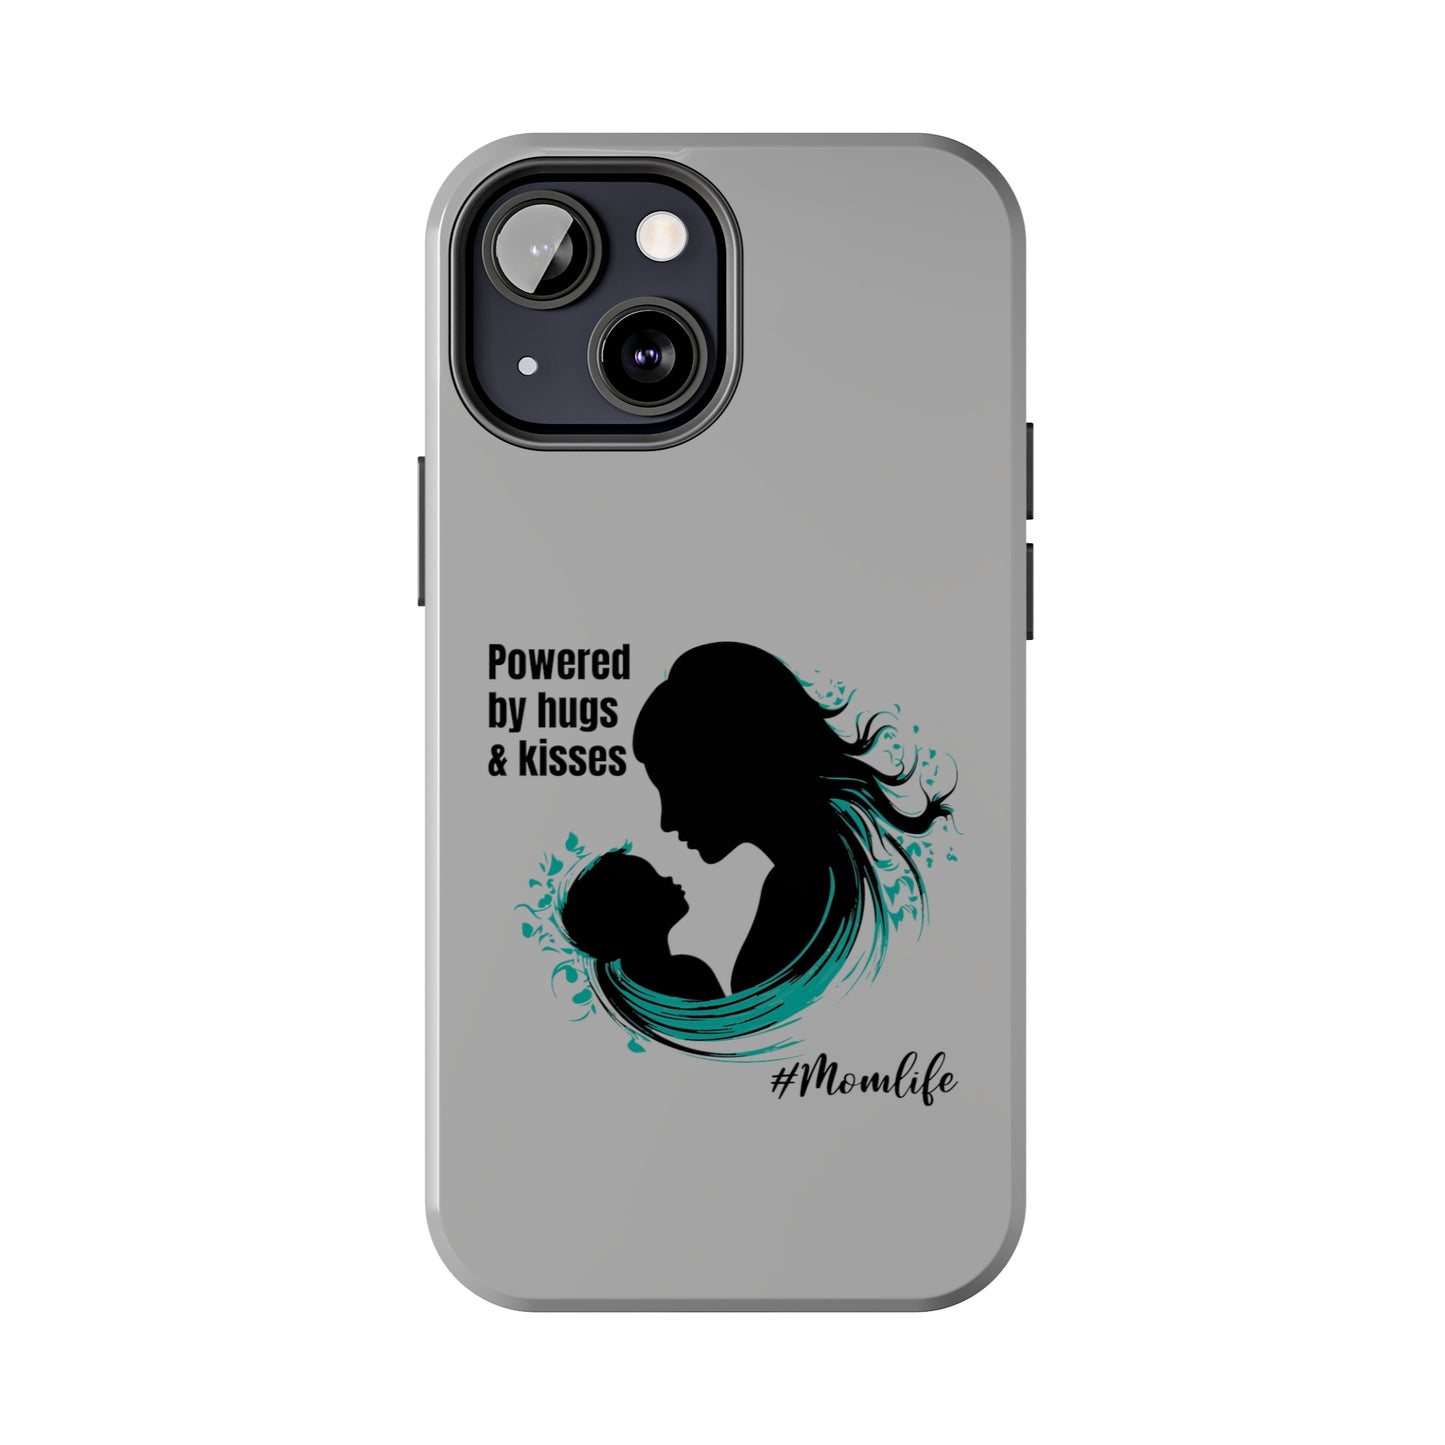 Powered By Hugs & Kisses Tough iPhone Cases | Great gift for Mom | #MomLife